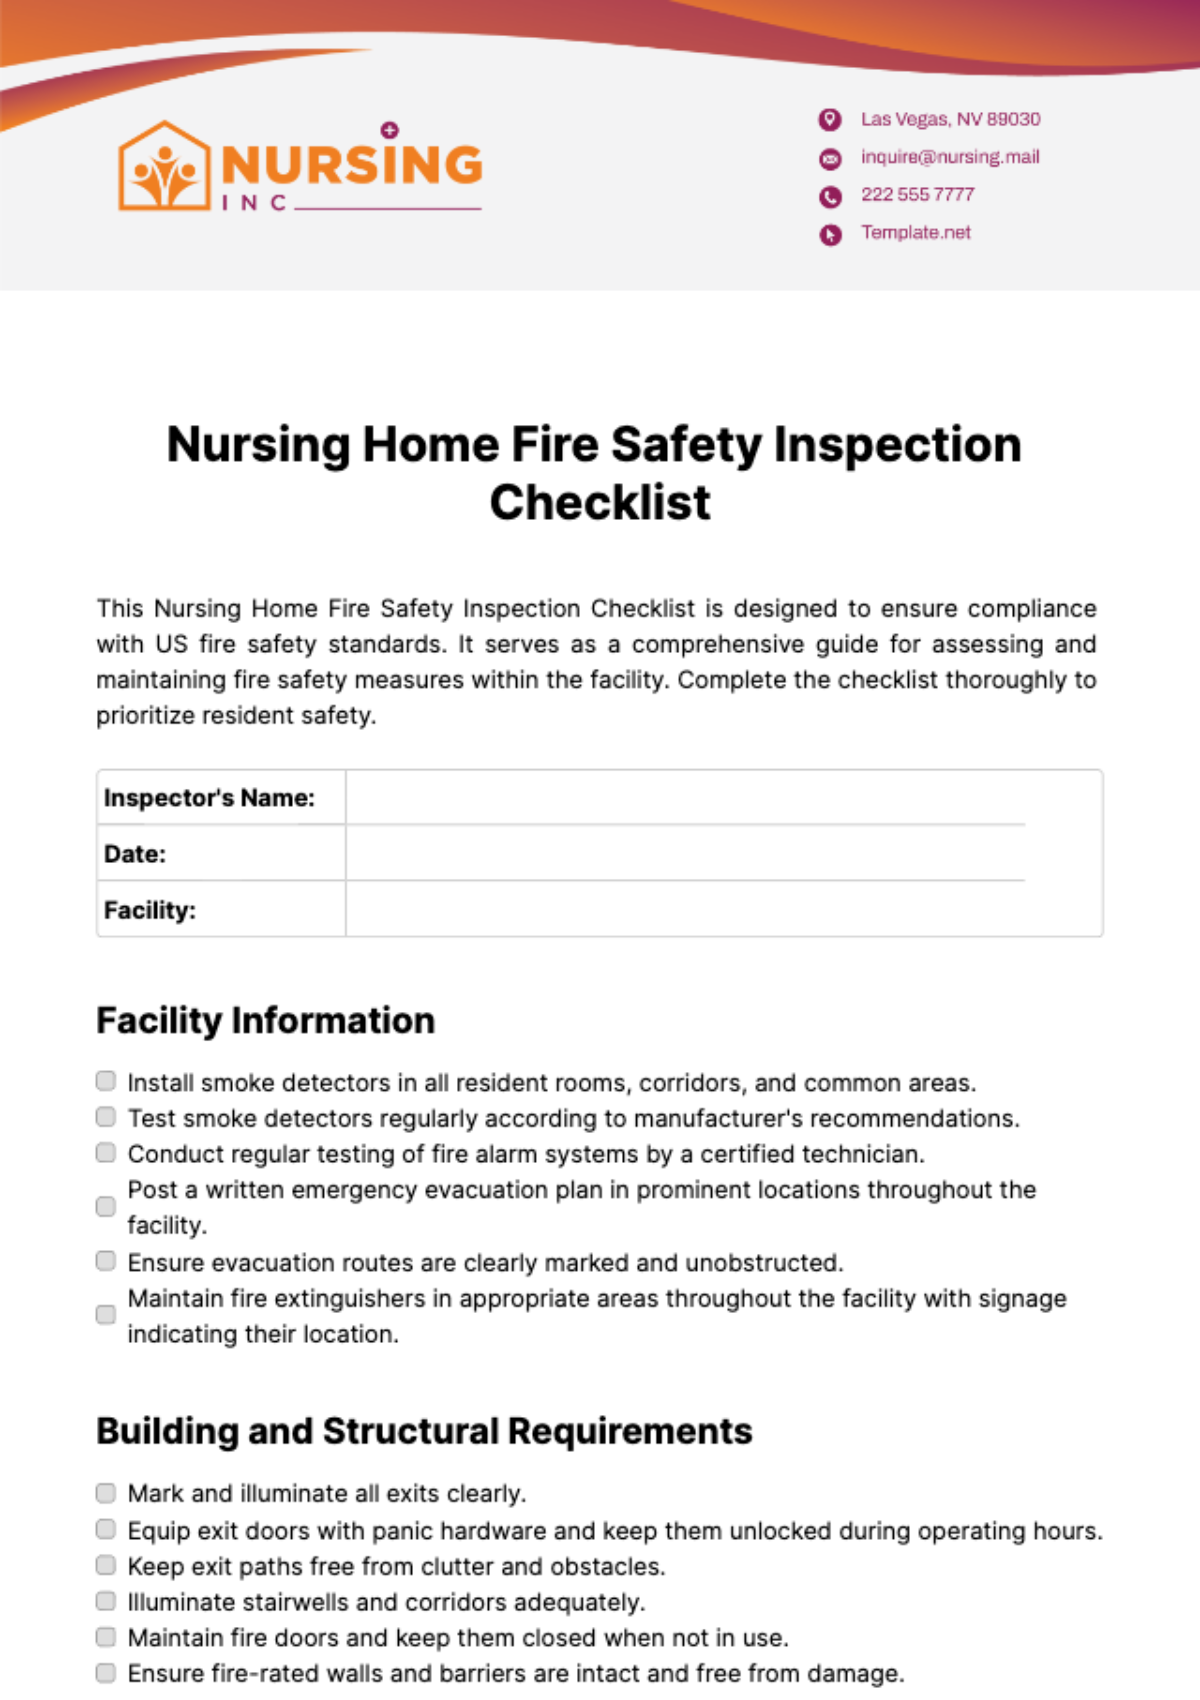 Nursing Home Fire Safety Inspection Checklist Template